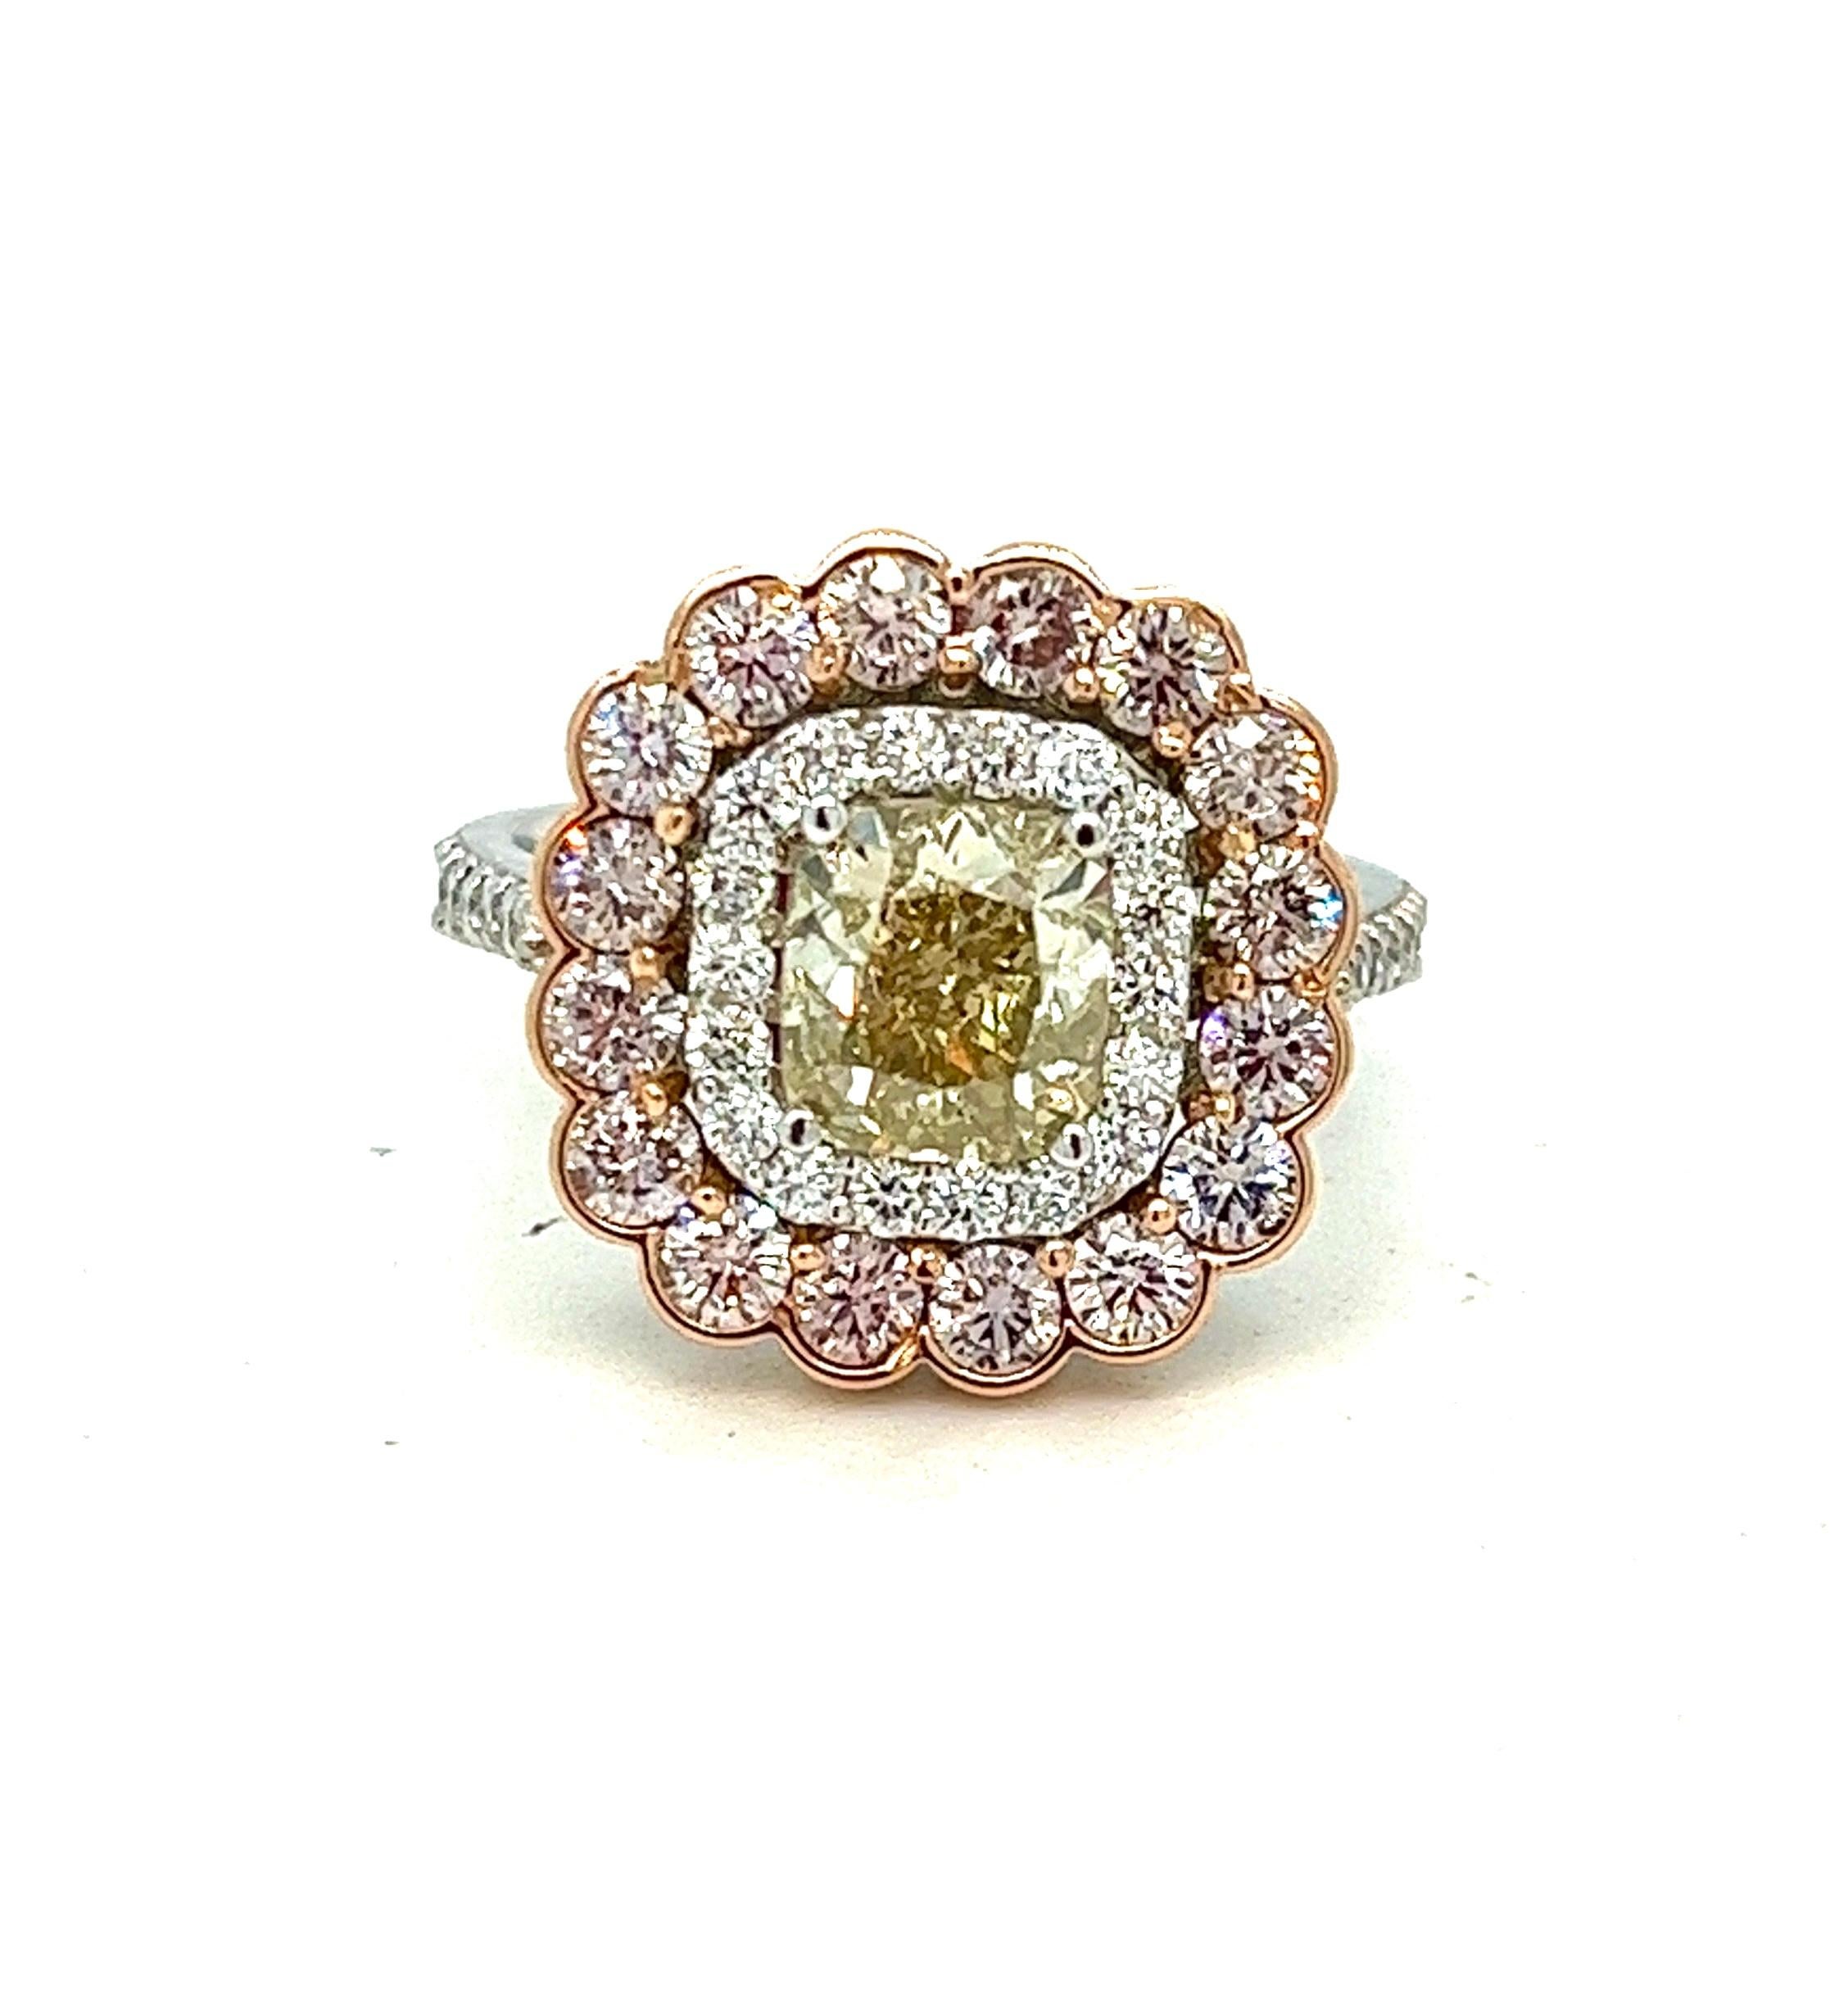 Offered here is a Stunning Ring, adorned with natural multi-color diamonds.
Centered with one natural yellow cushion cut diamond, set in 4 prongs within a white diamond halo, which in turn is framed in a pink diamond frame, ring is further adorned